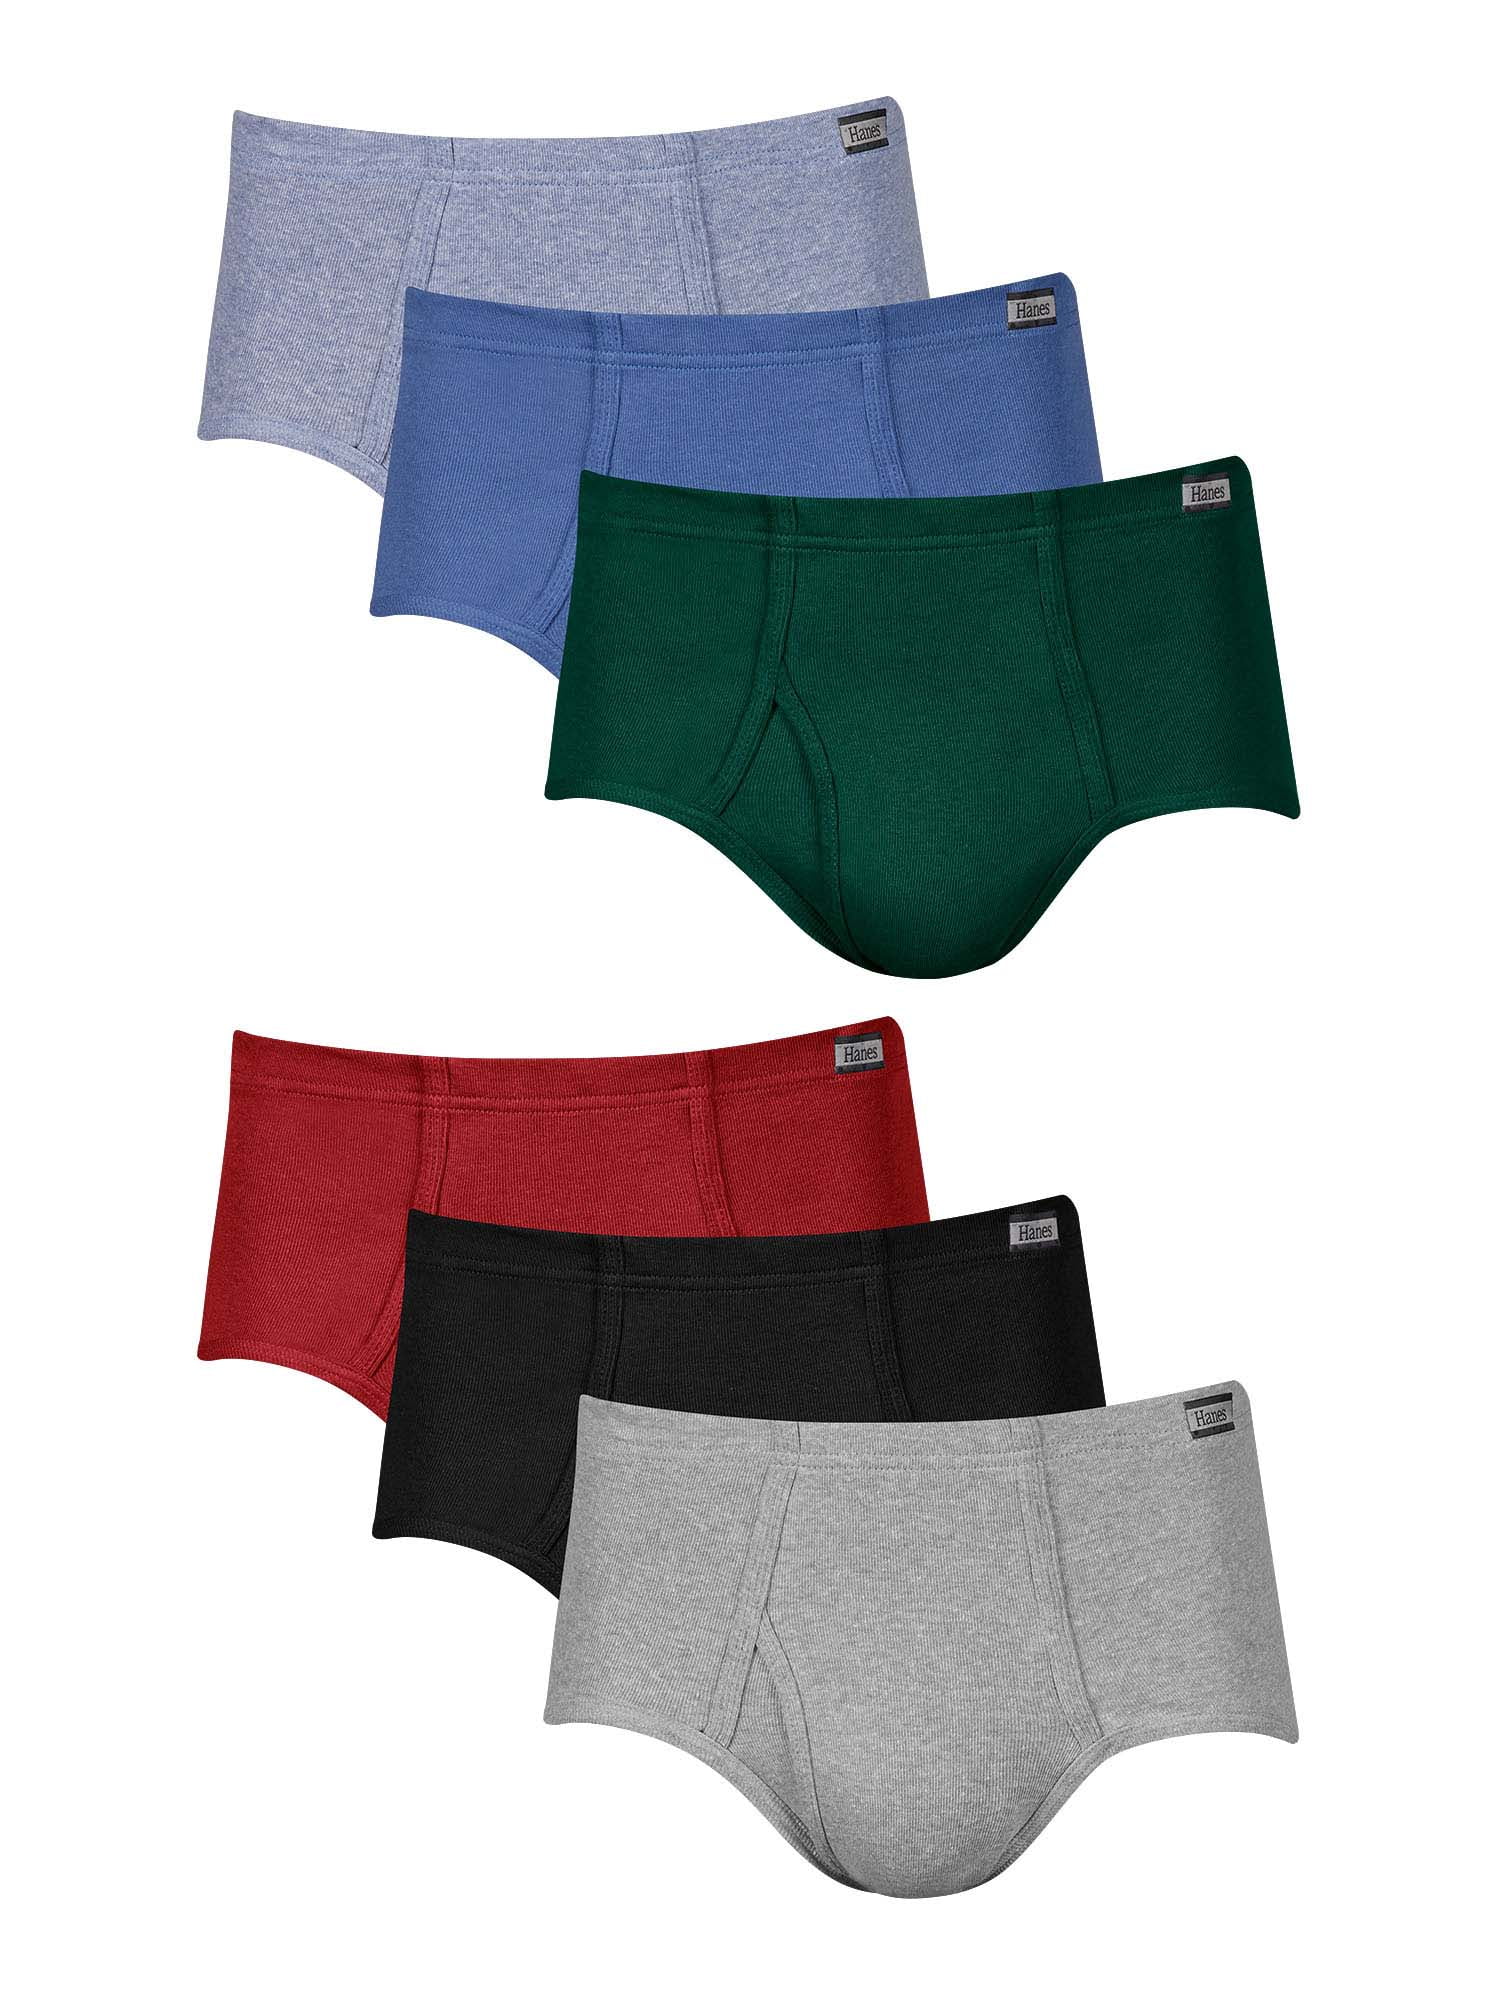 Briefs » Hanes,Juicy Couture Fashion Cheap Store » Every Six Weeks